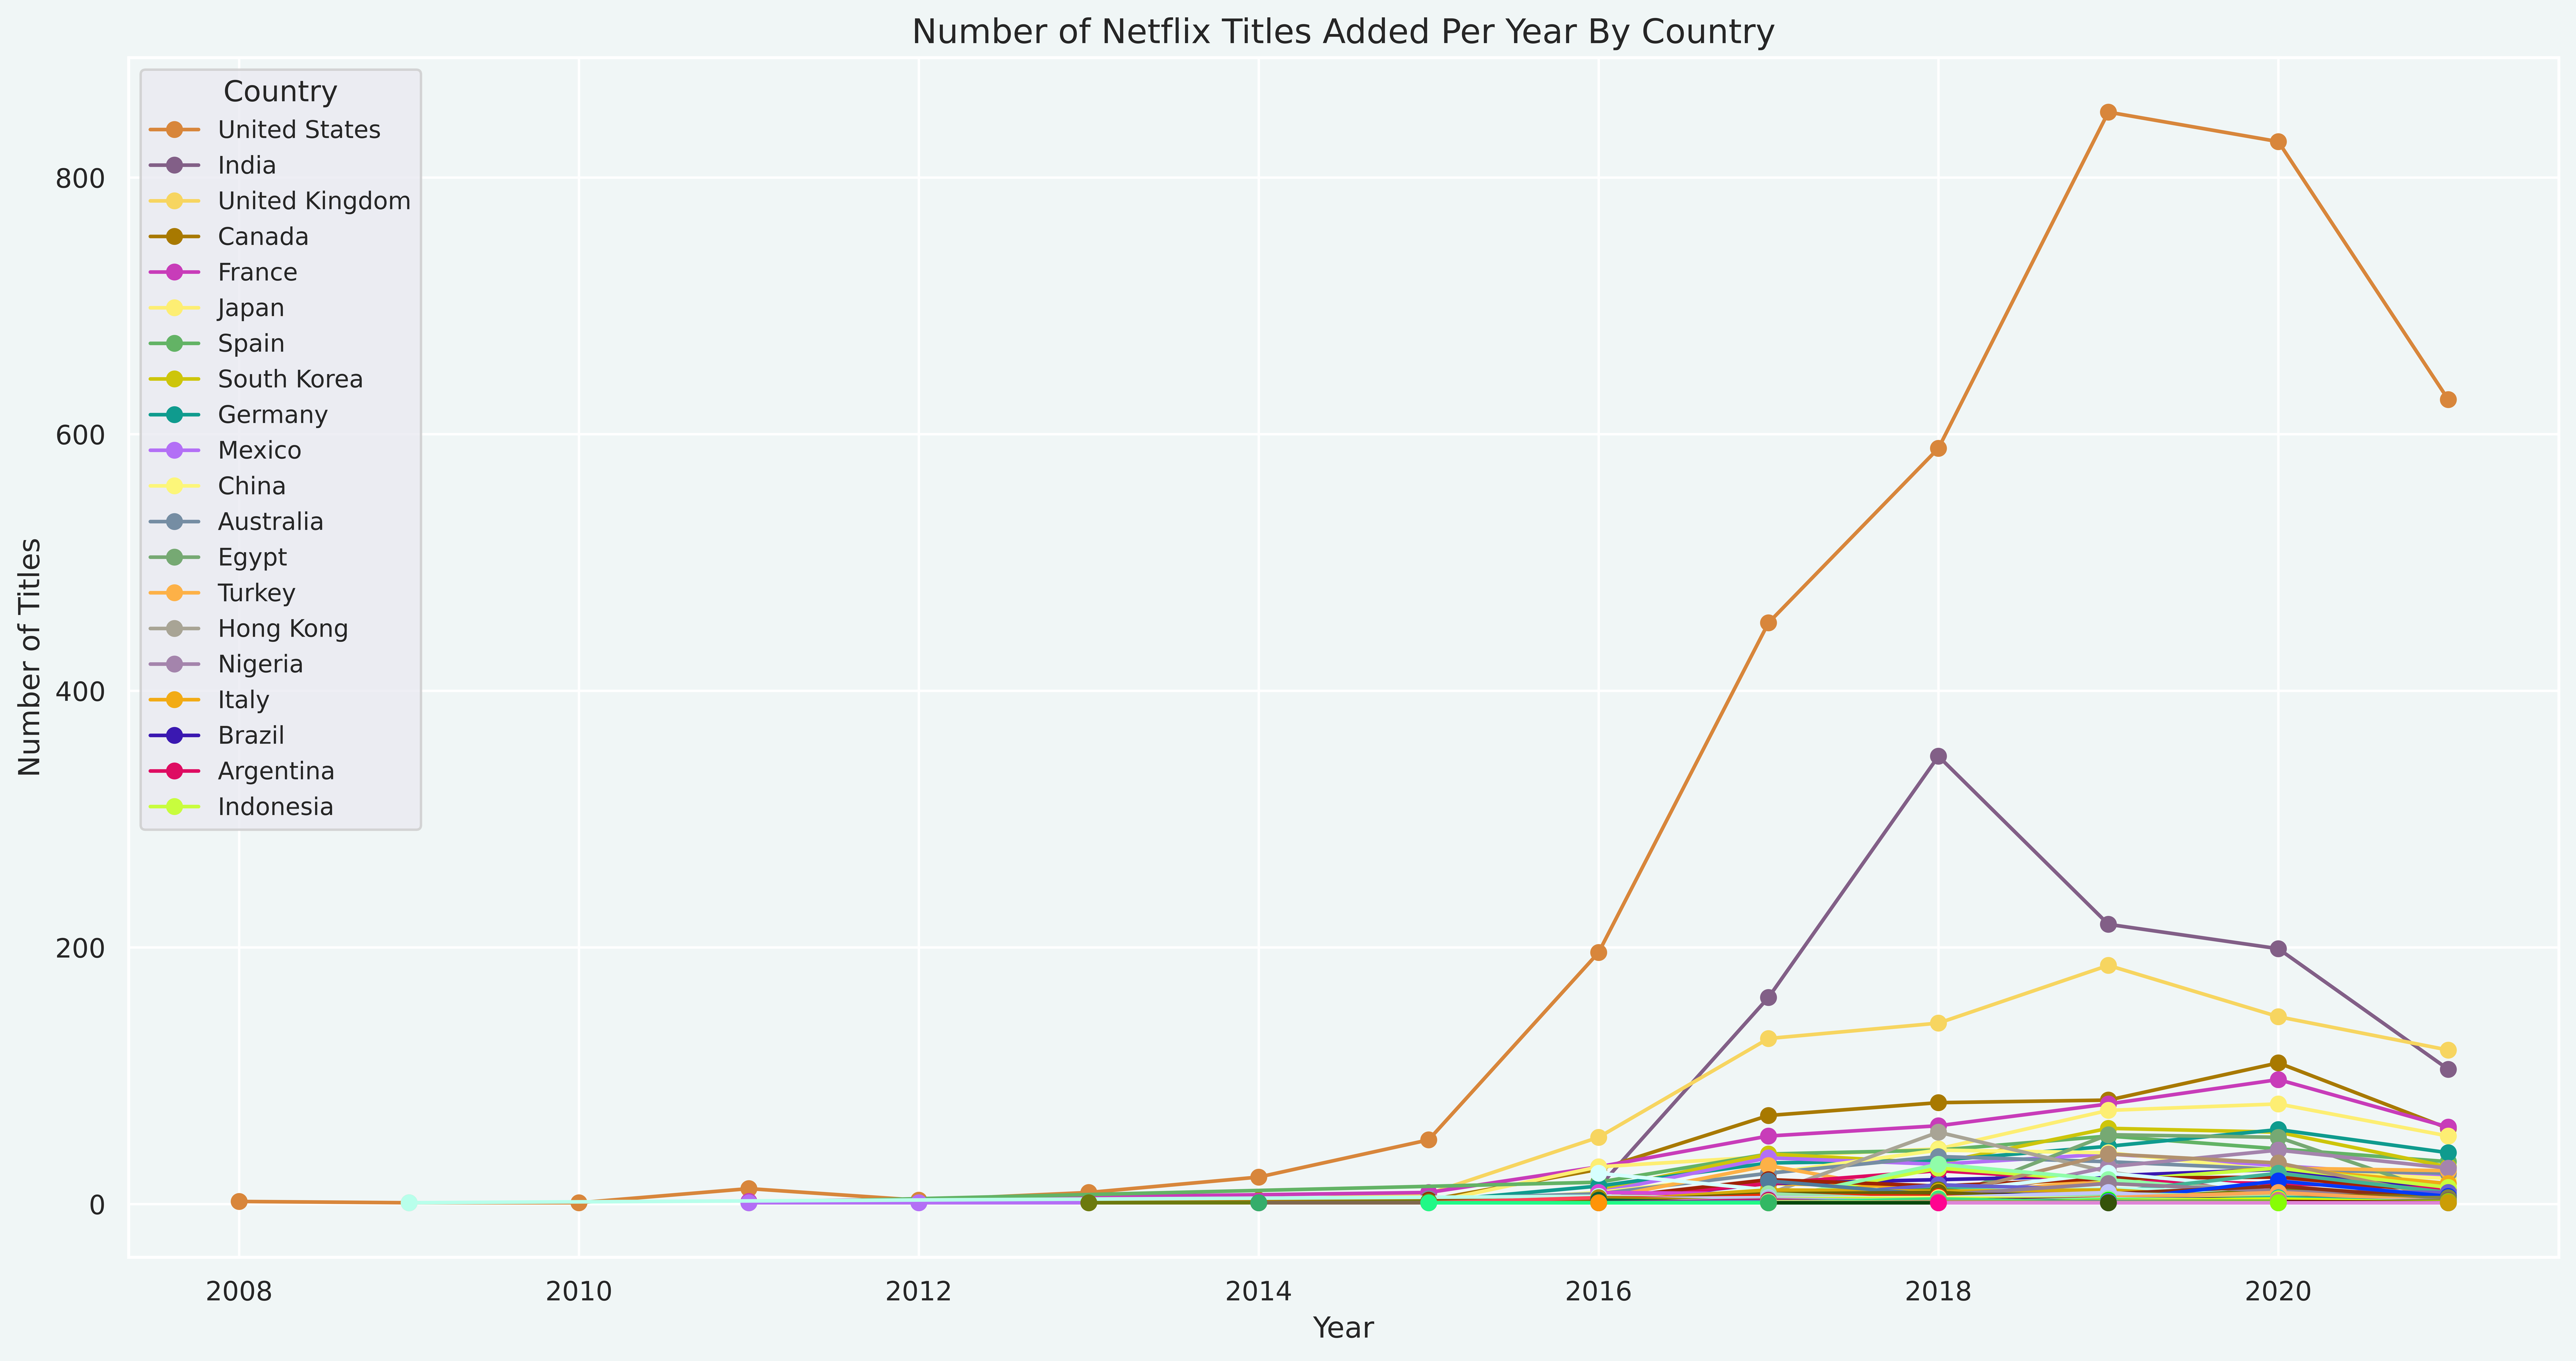 Number of Titles Per Production Country Over Time